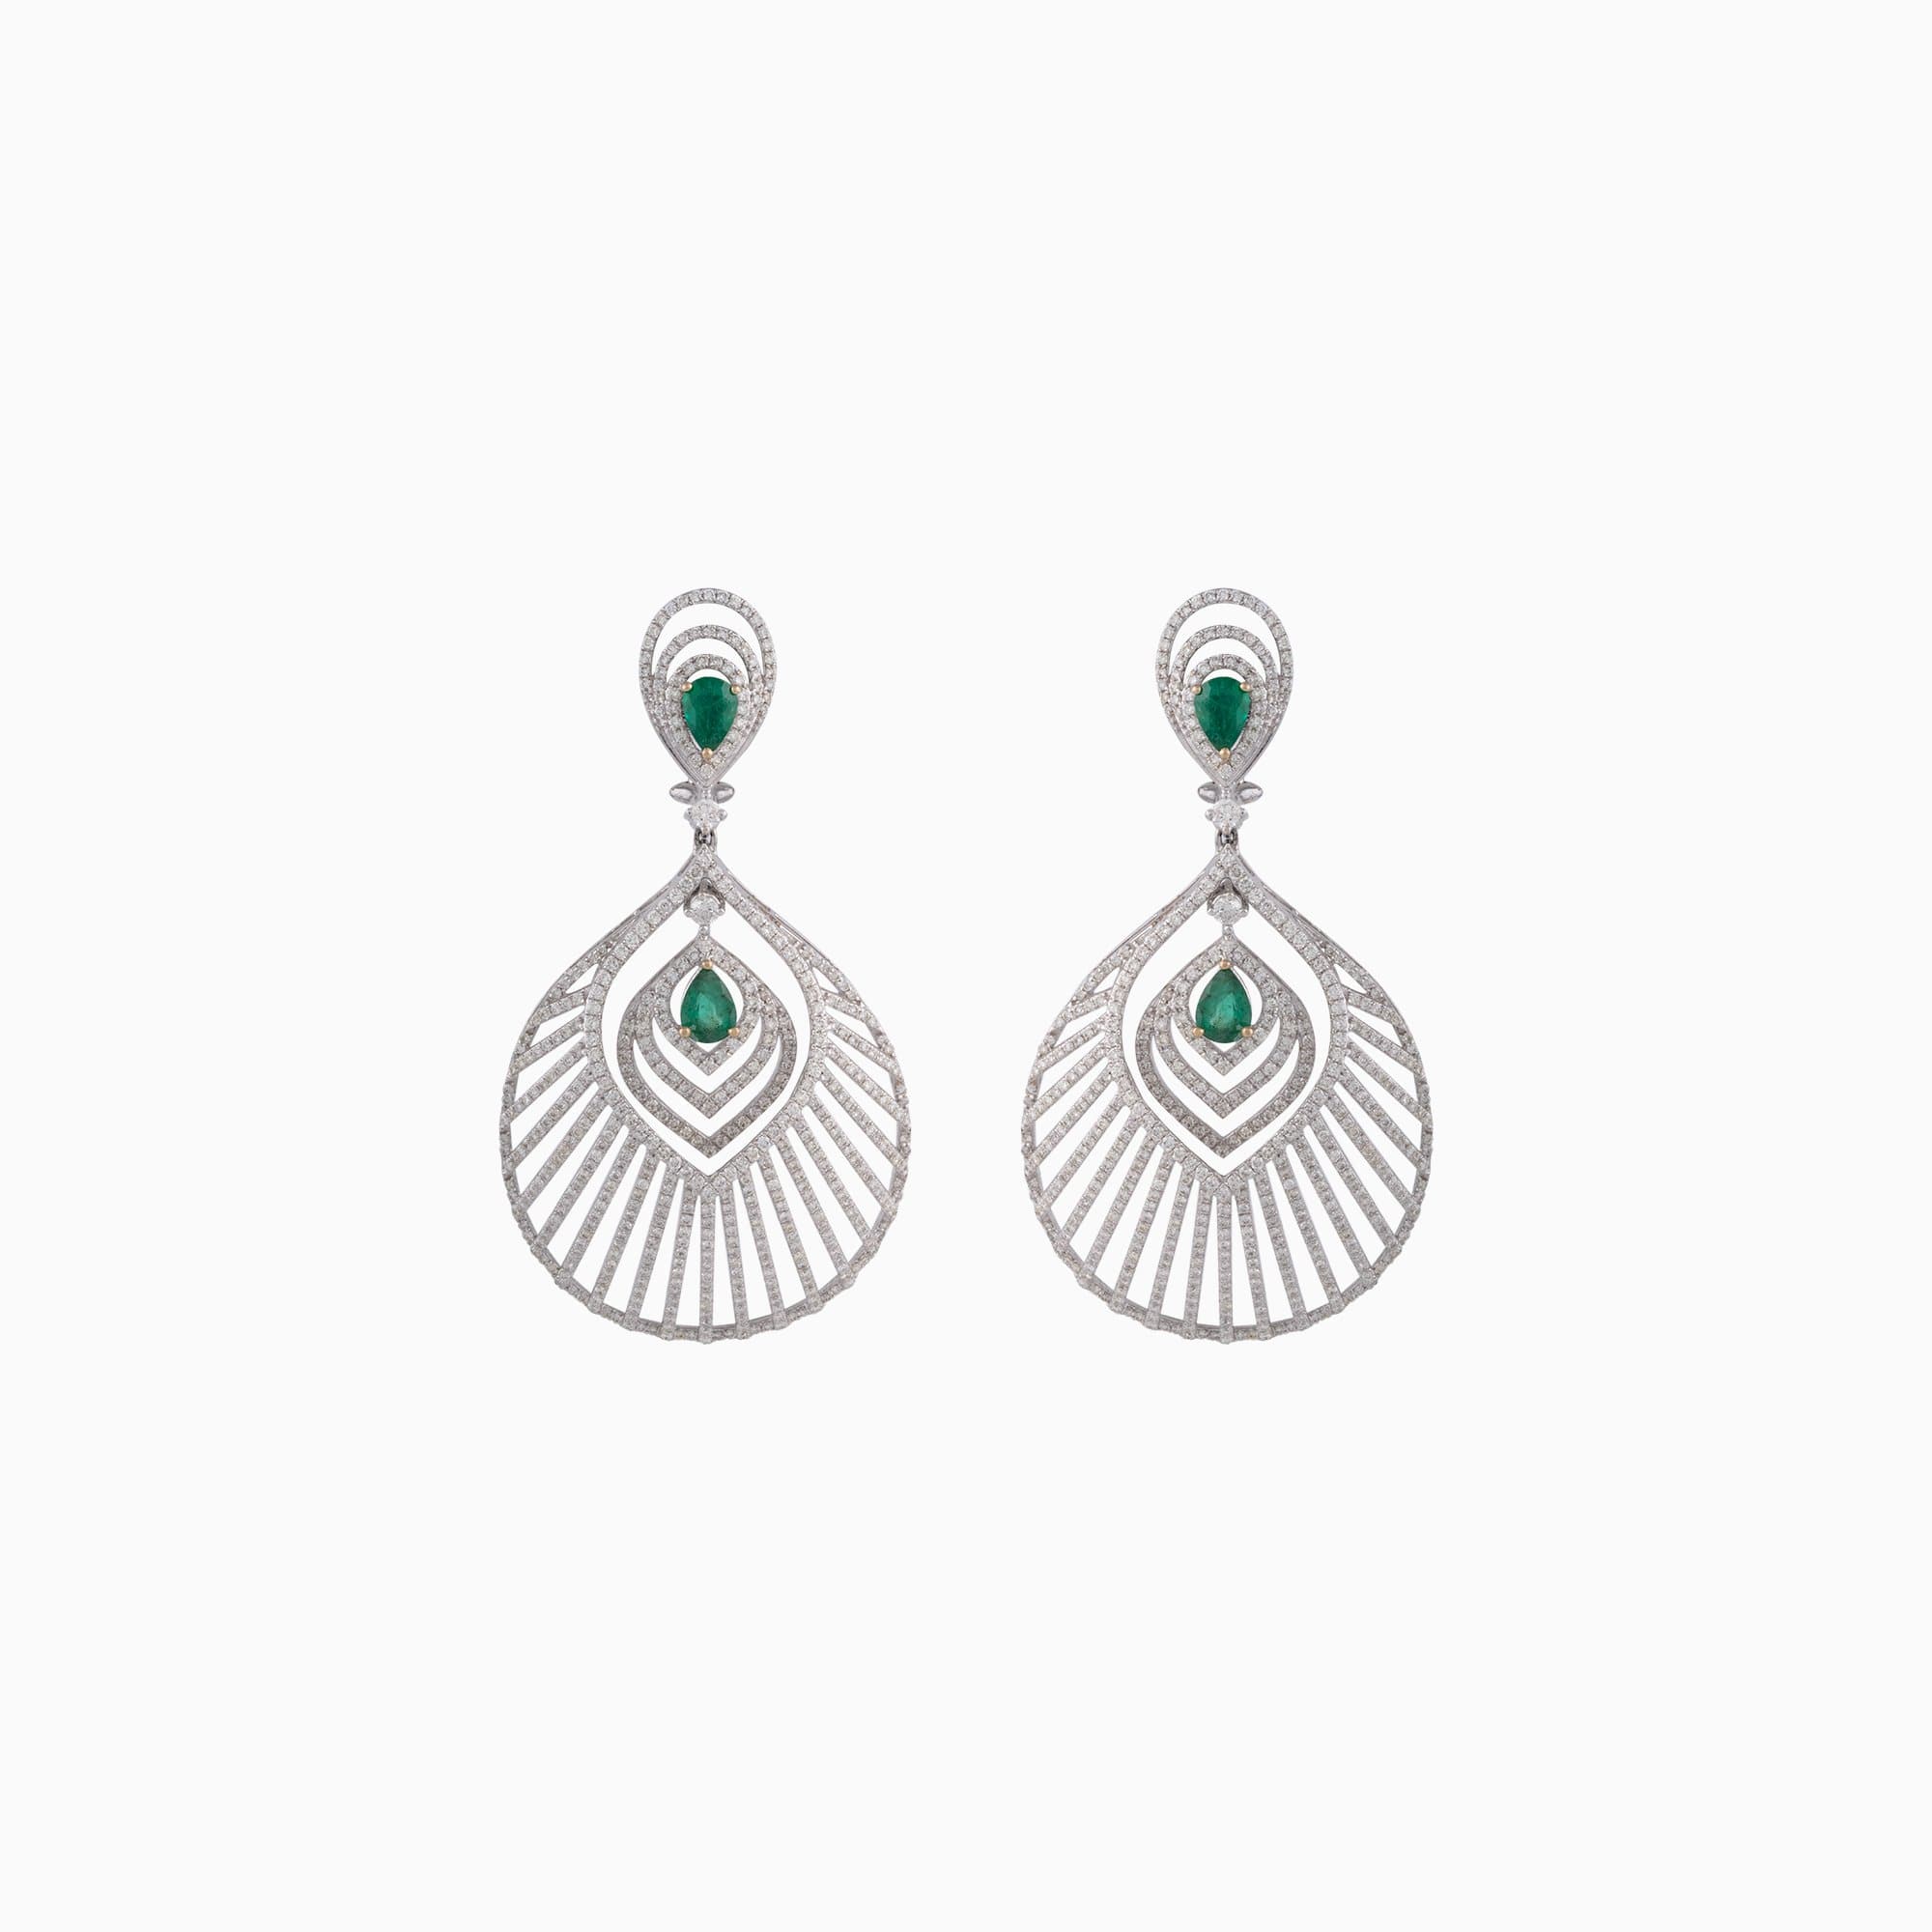 Earring Pair with Round Cut Diamond and Pear Cut Emerald - PGDE0134